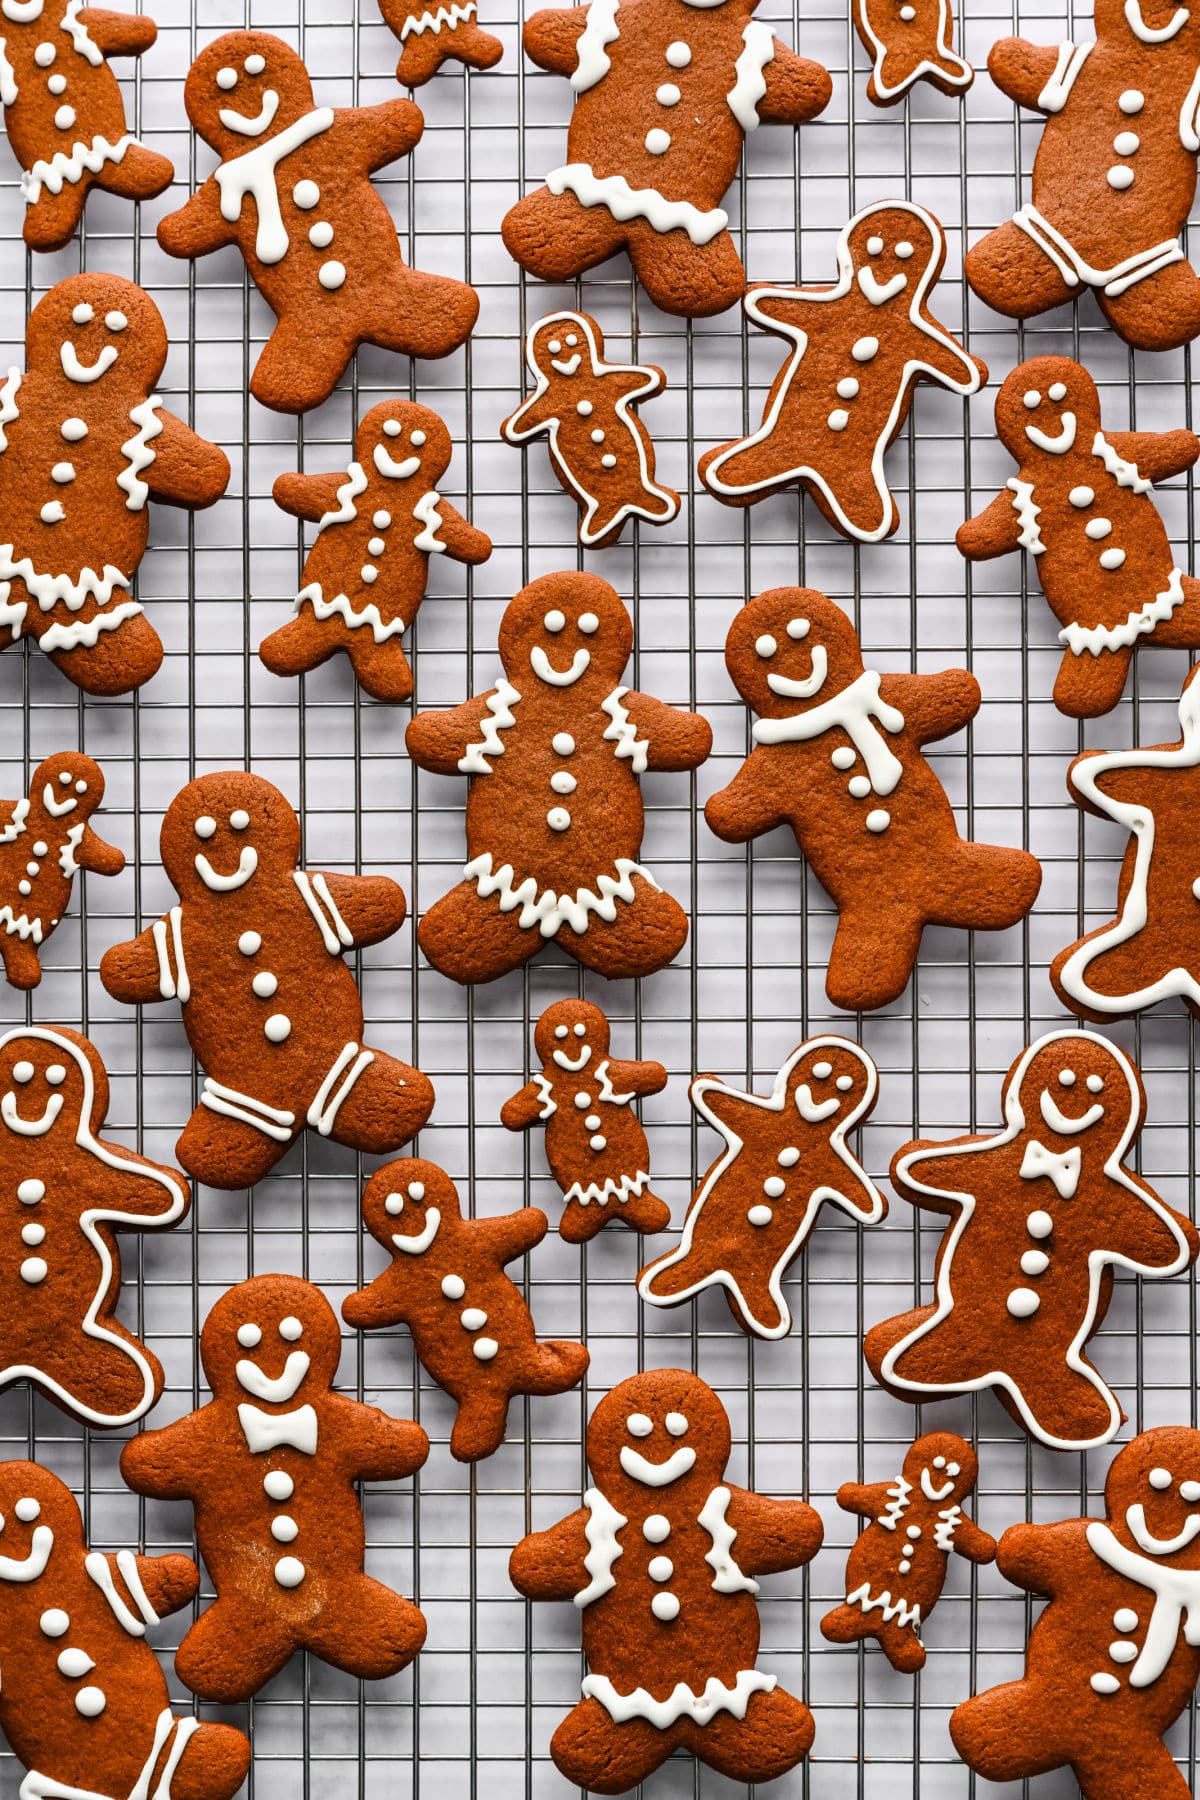 Large and small decorated gingerbread men on a wire rack.